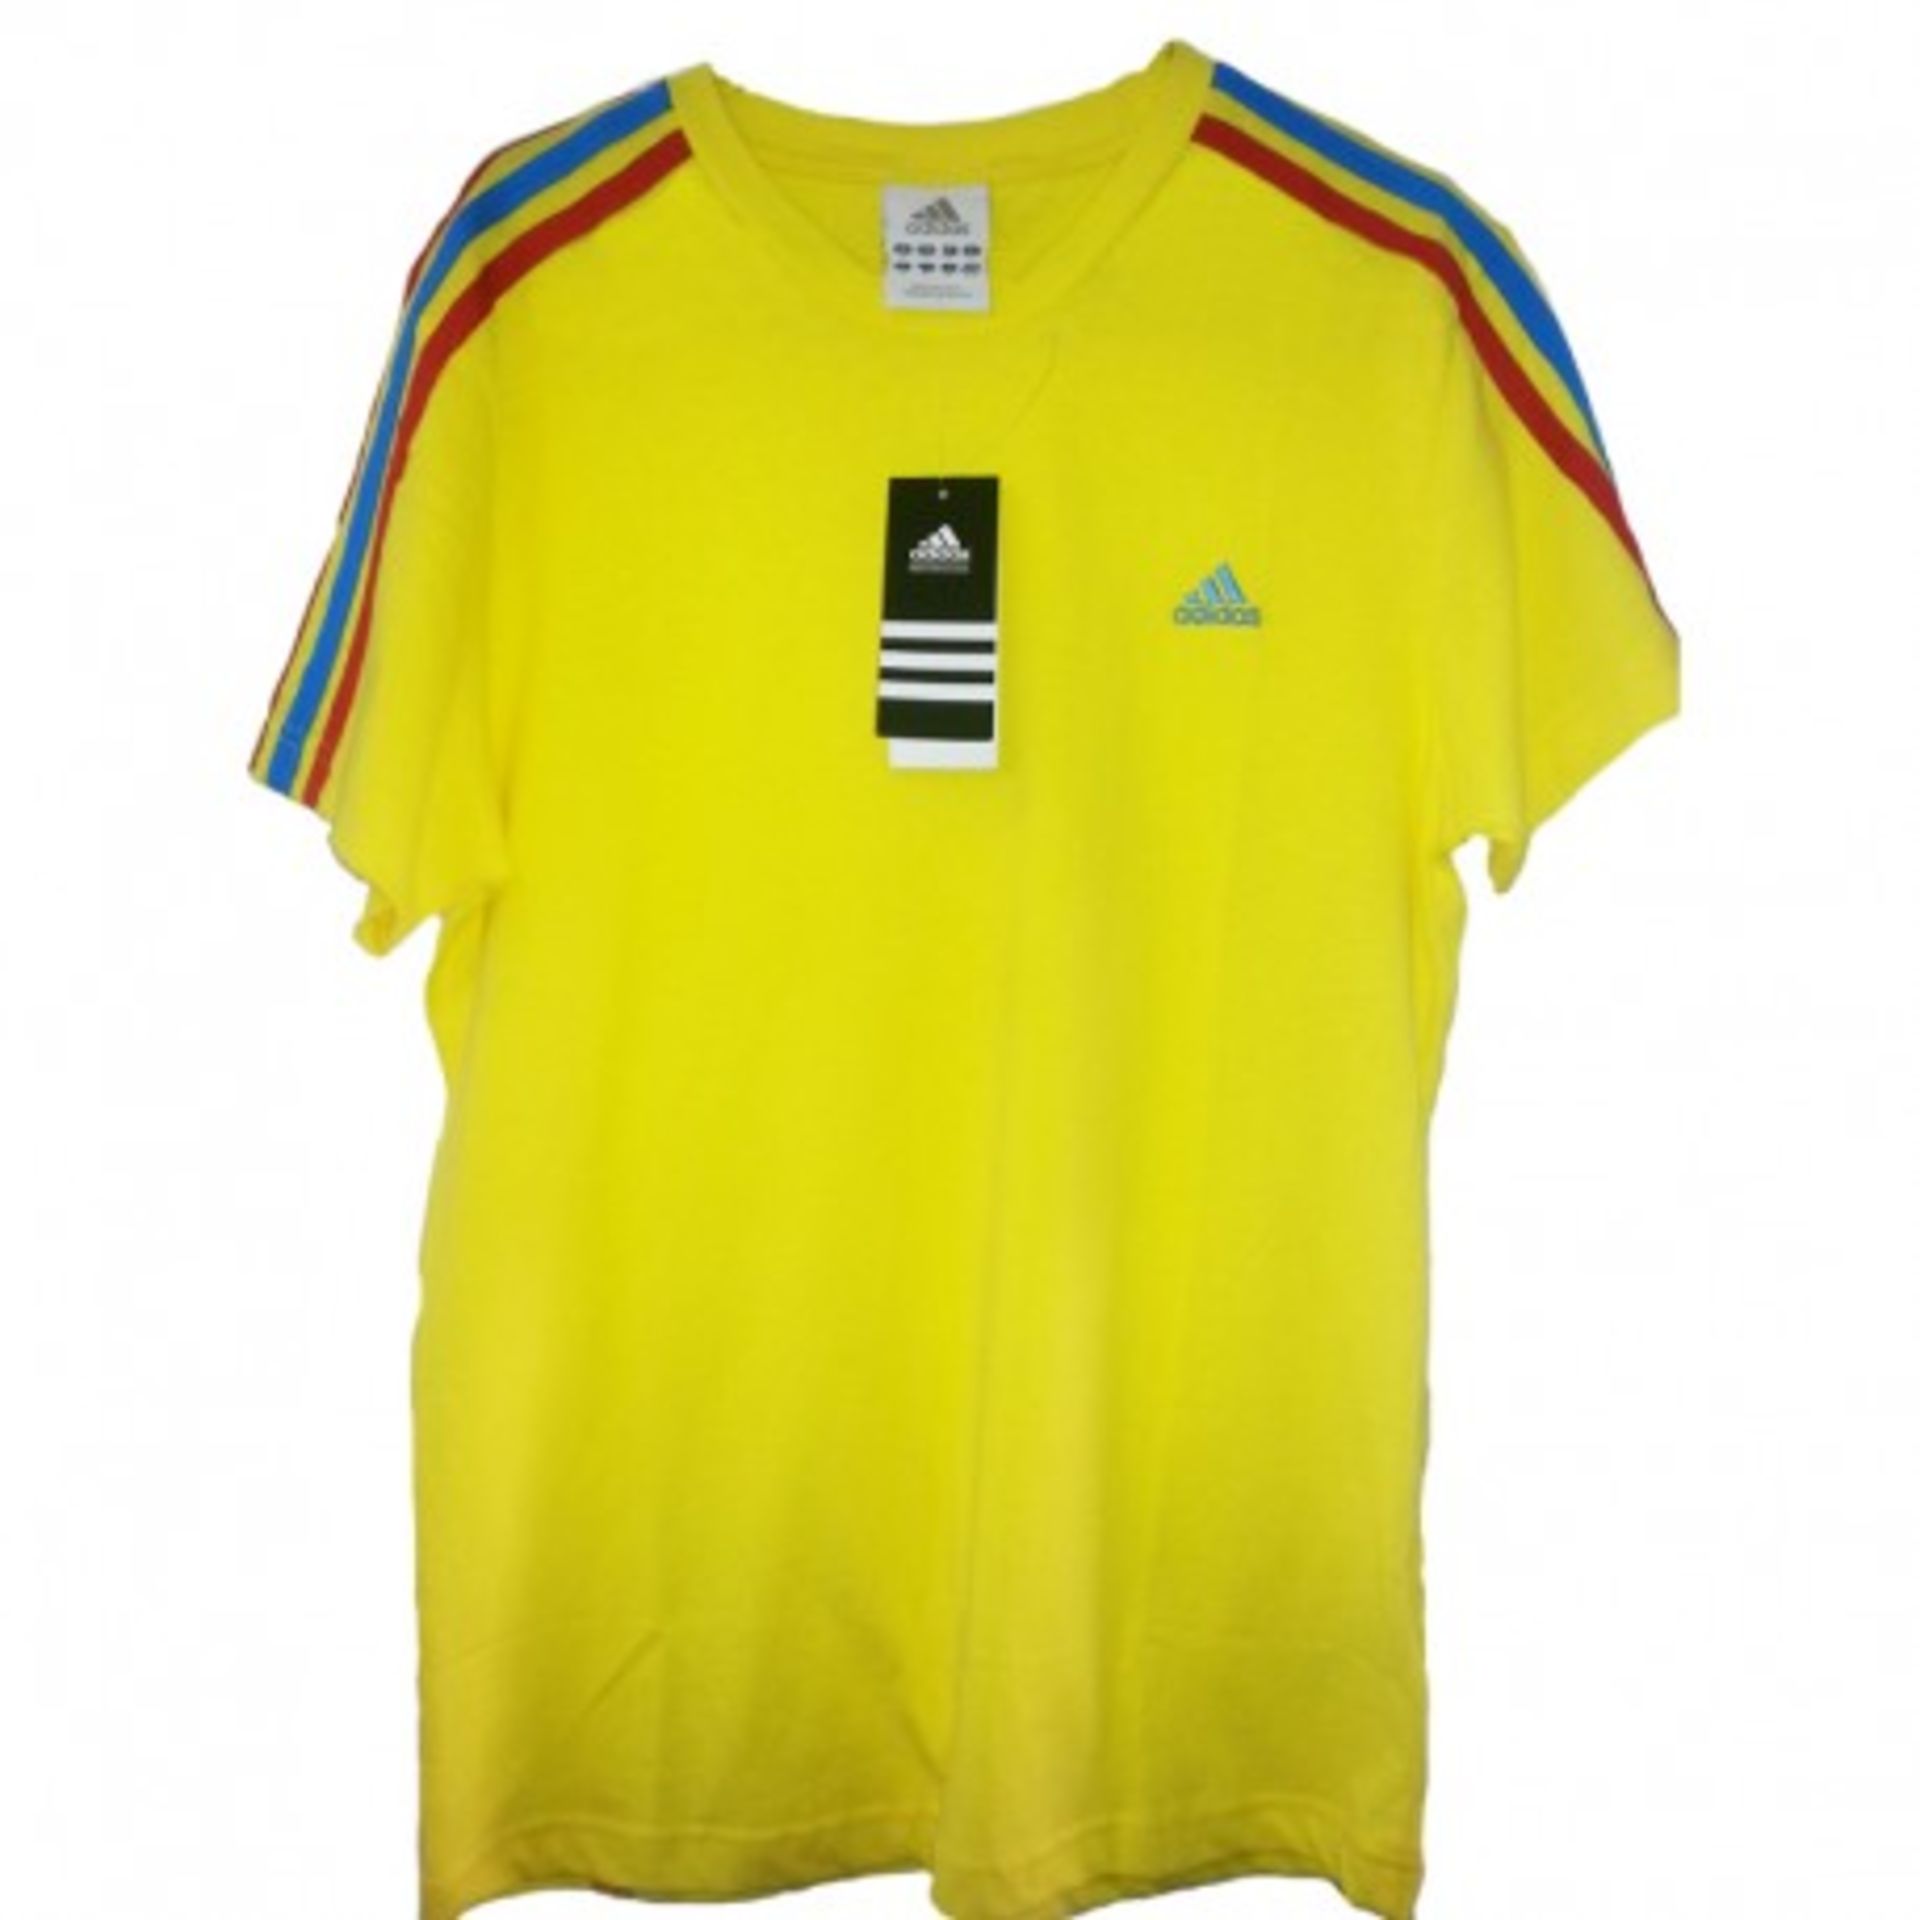 V Brand New 5 in a Pack Addidas Crew Neck T Shirts 100% Cotton Short Sleeve 3 Stripe Detail Colours: